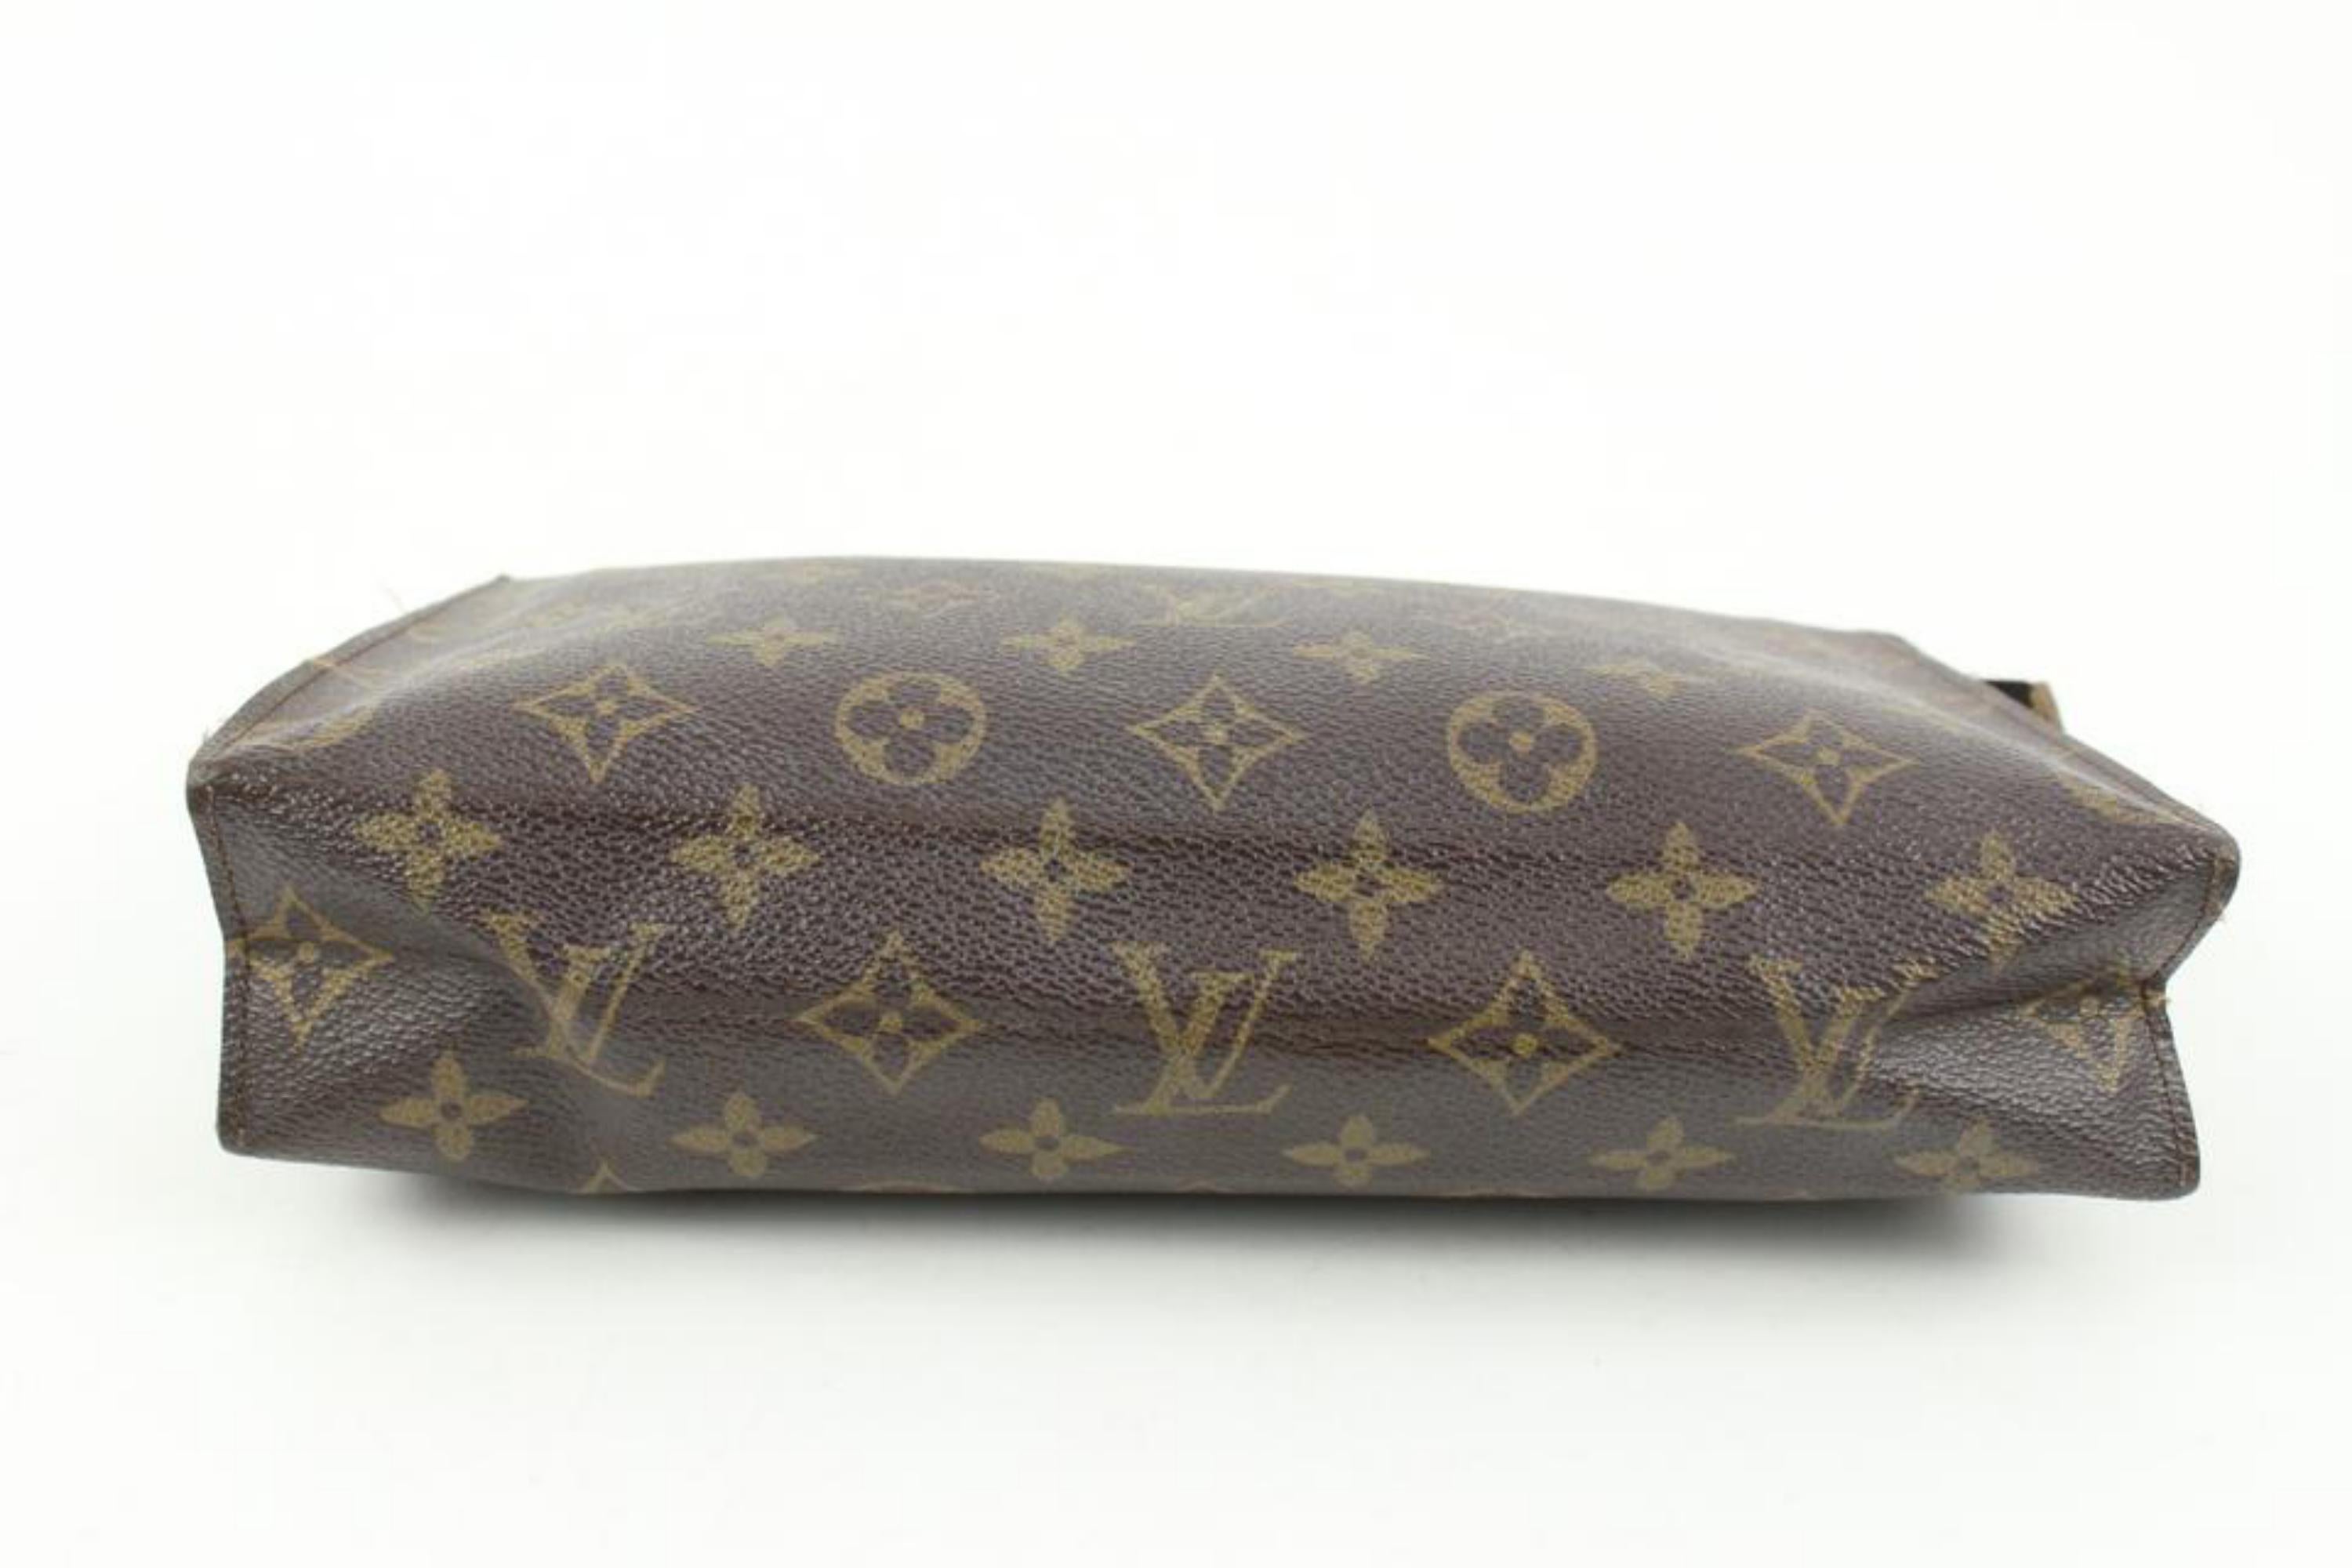 Louis Vuitton Discontinued Monogram Toiletry Pouch 26 Poche Toilette 114lv2 In Good Condition For Sale In Dix hills, NY